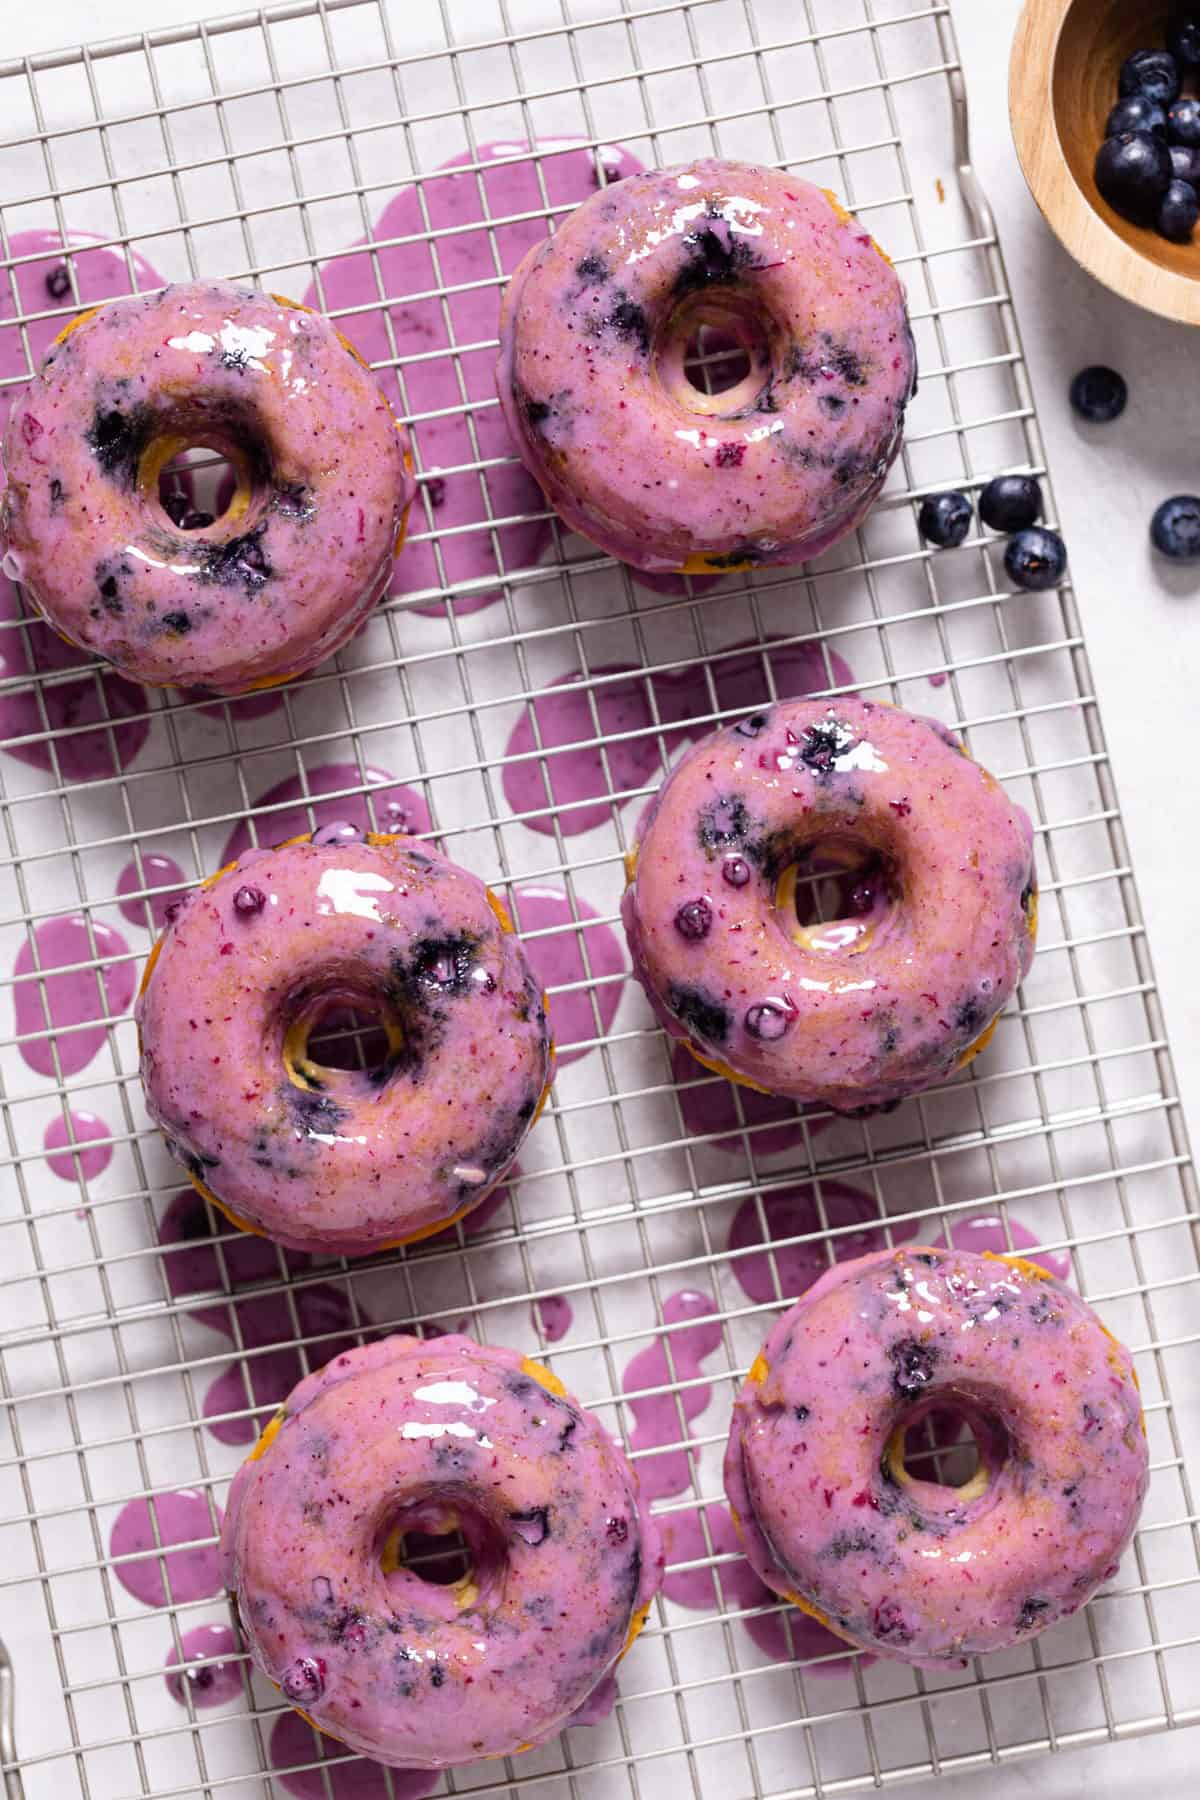 Blueberry Vegan Donuts with Blueberry Glaze on a wire rack with blueberries.